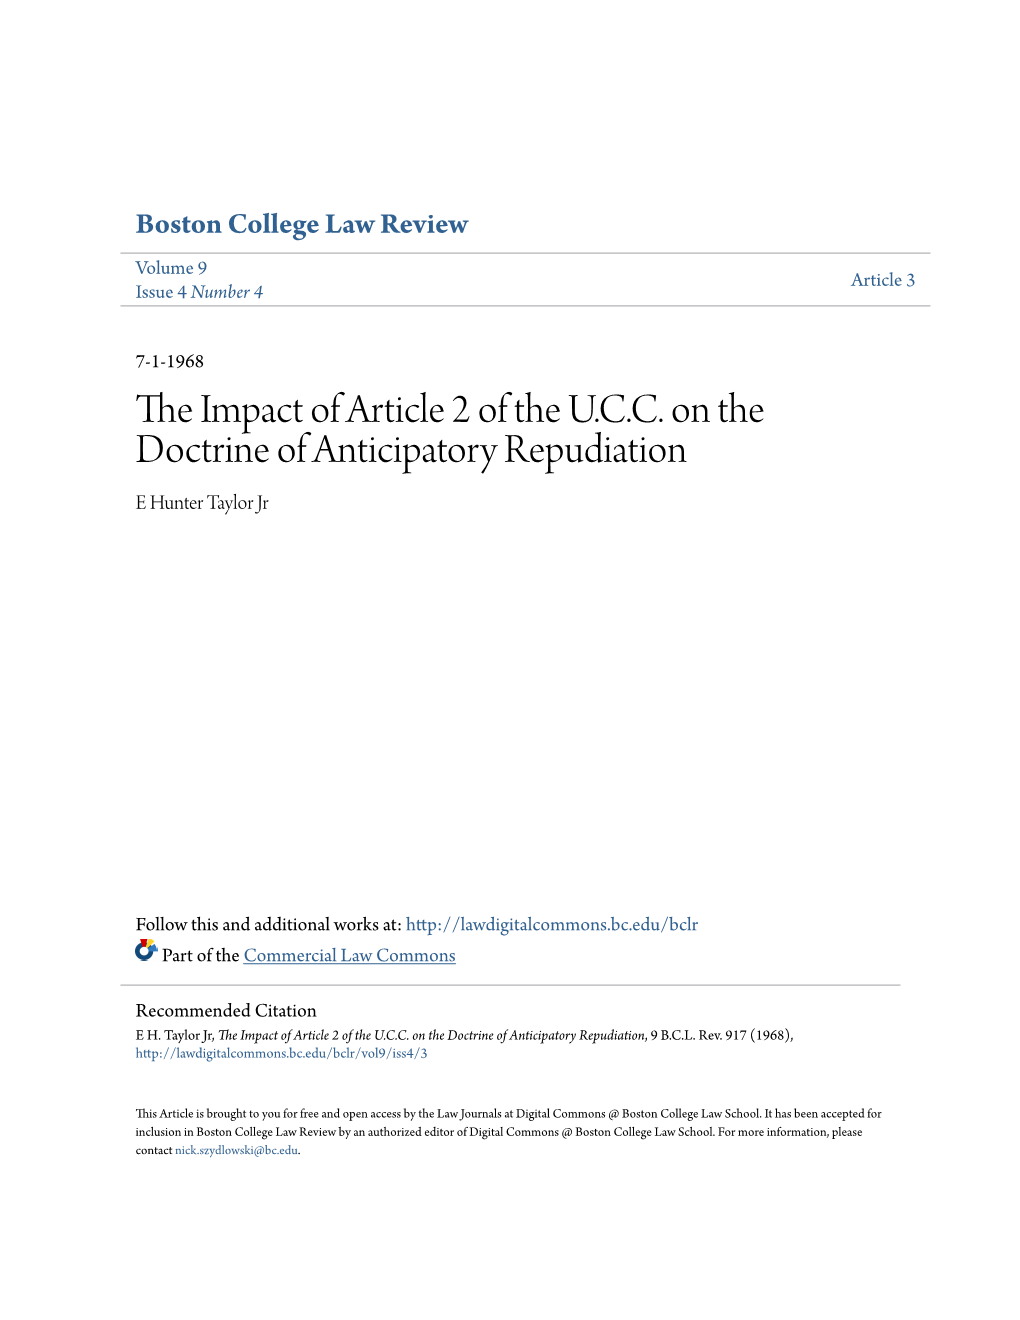 The Impact of Article 2 of the U.C.C. on the Doctrine of Anticipatory Repudiation, 9 B.C.L